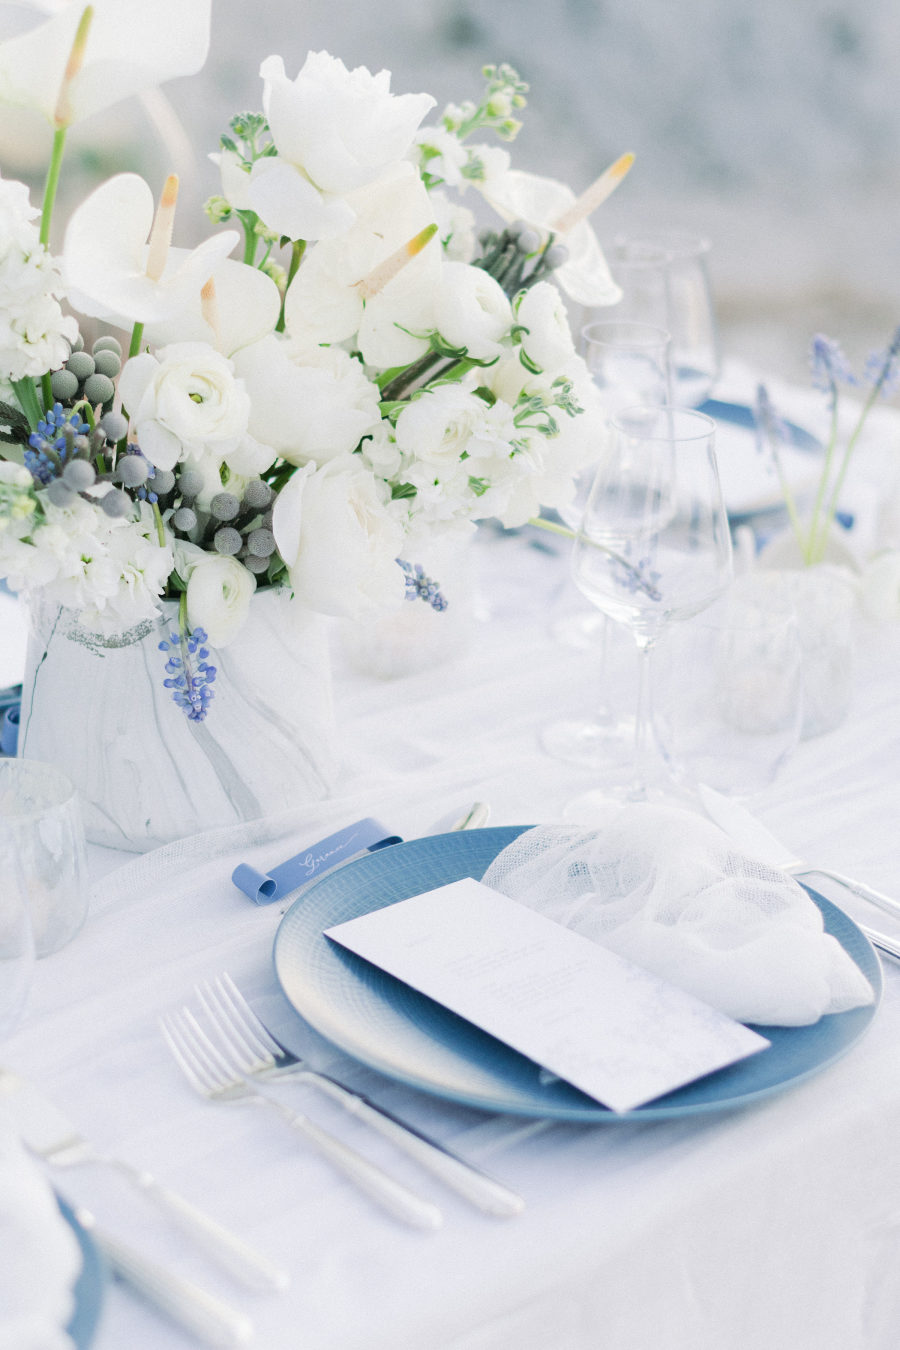 The wedding table was done in white and blues with a lush floral centerpiece, blue chargers and neutrals